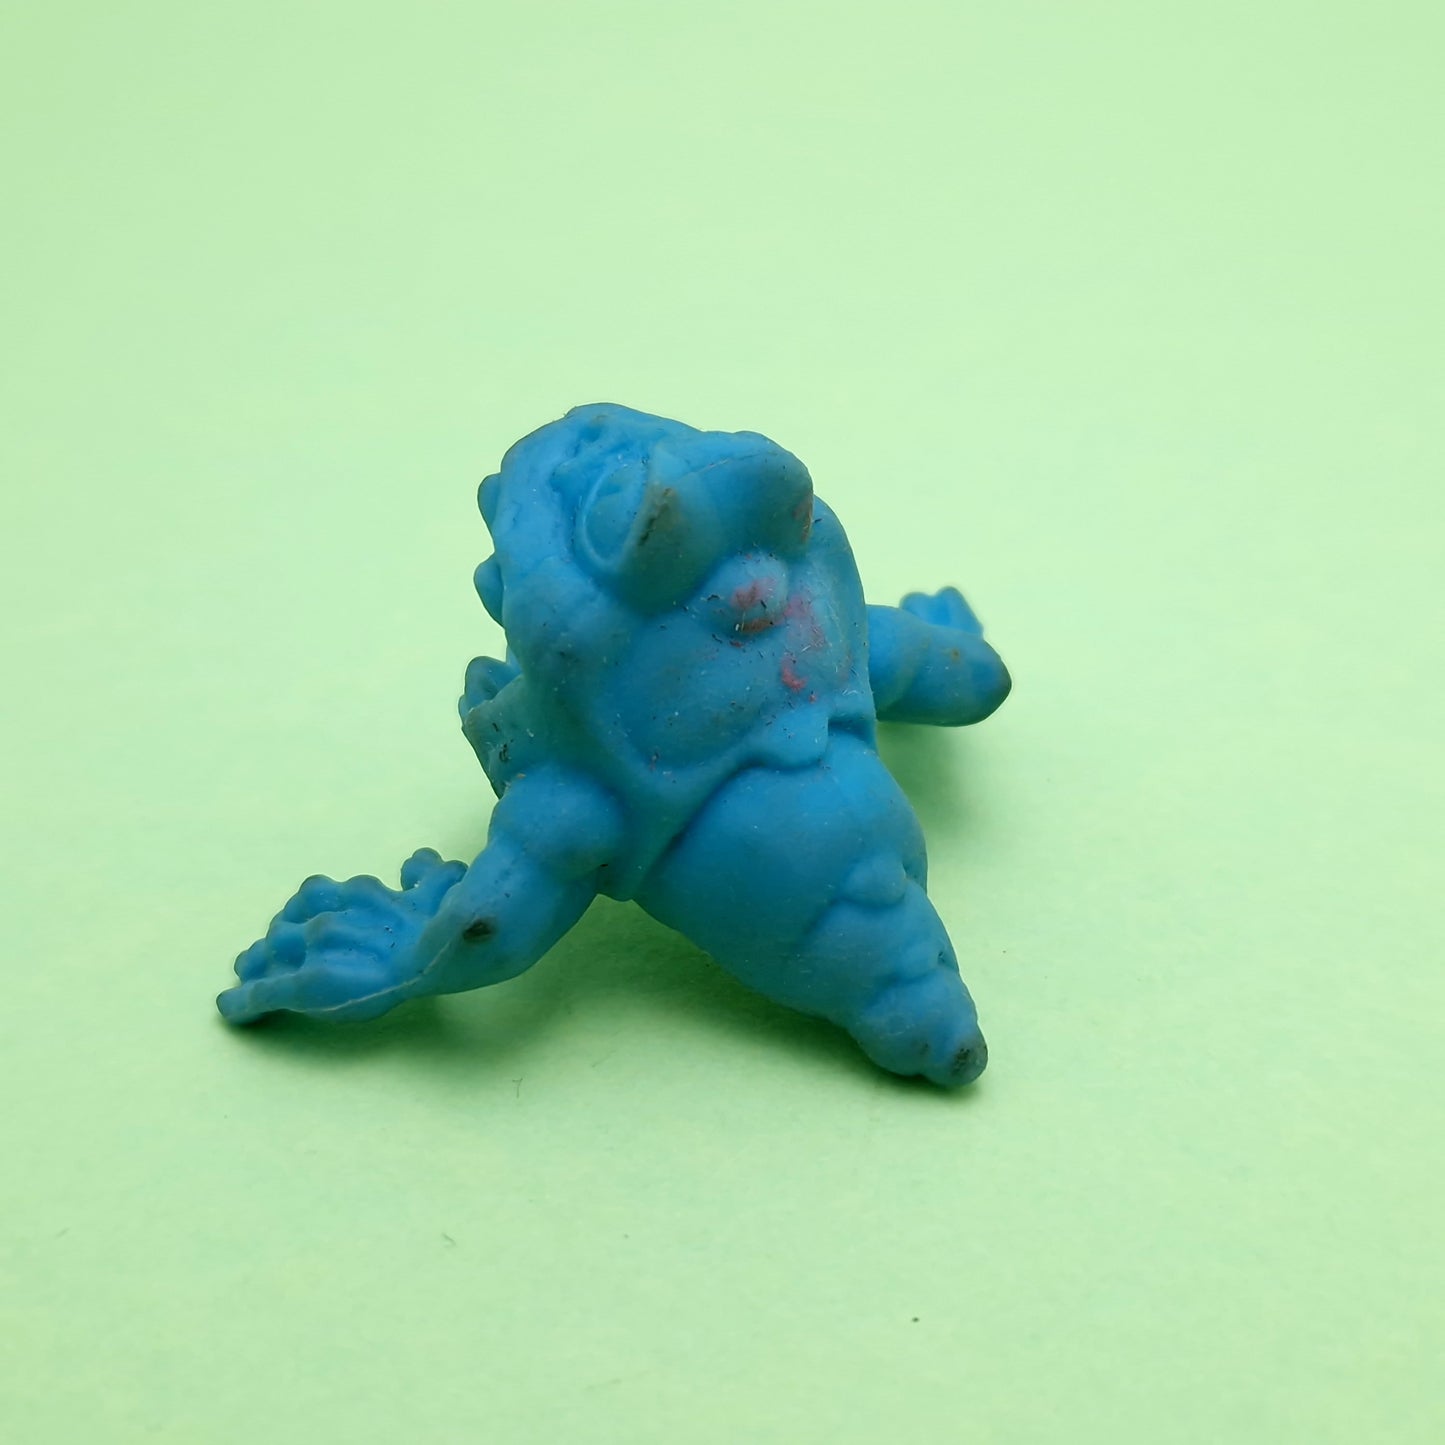 GHOSTBUSTERS ☆ MINI BLUE Ghost from Yellow Ecto-Plazm Vintage Figure ☆ Kenner